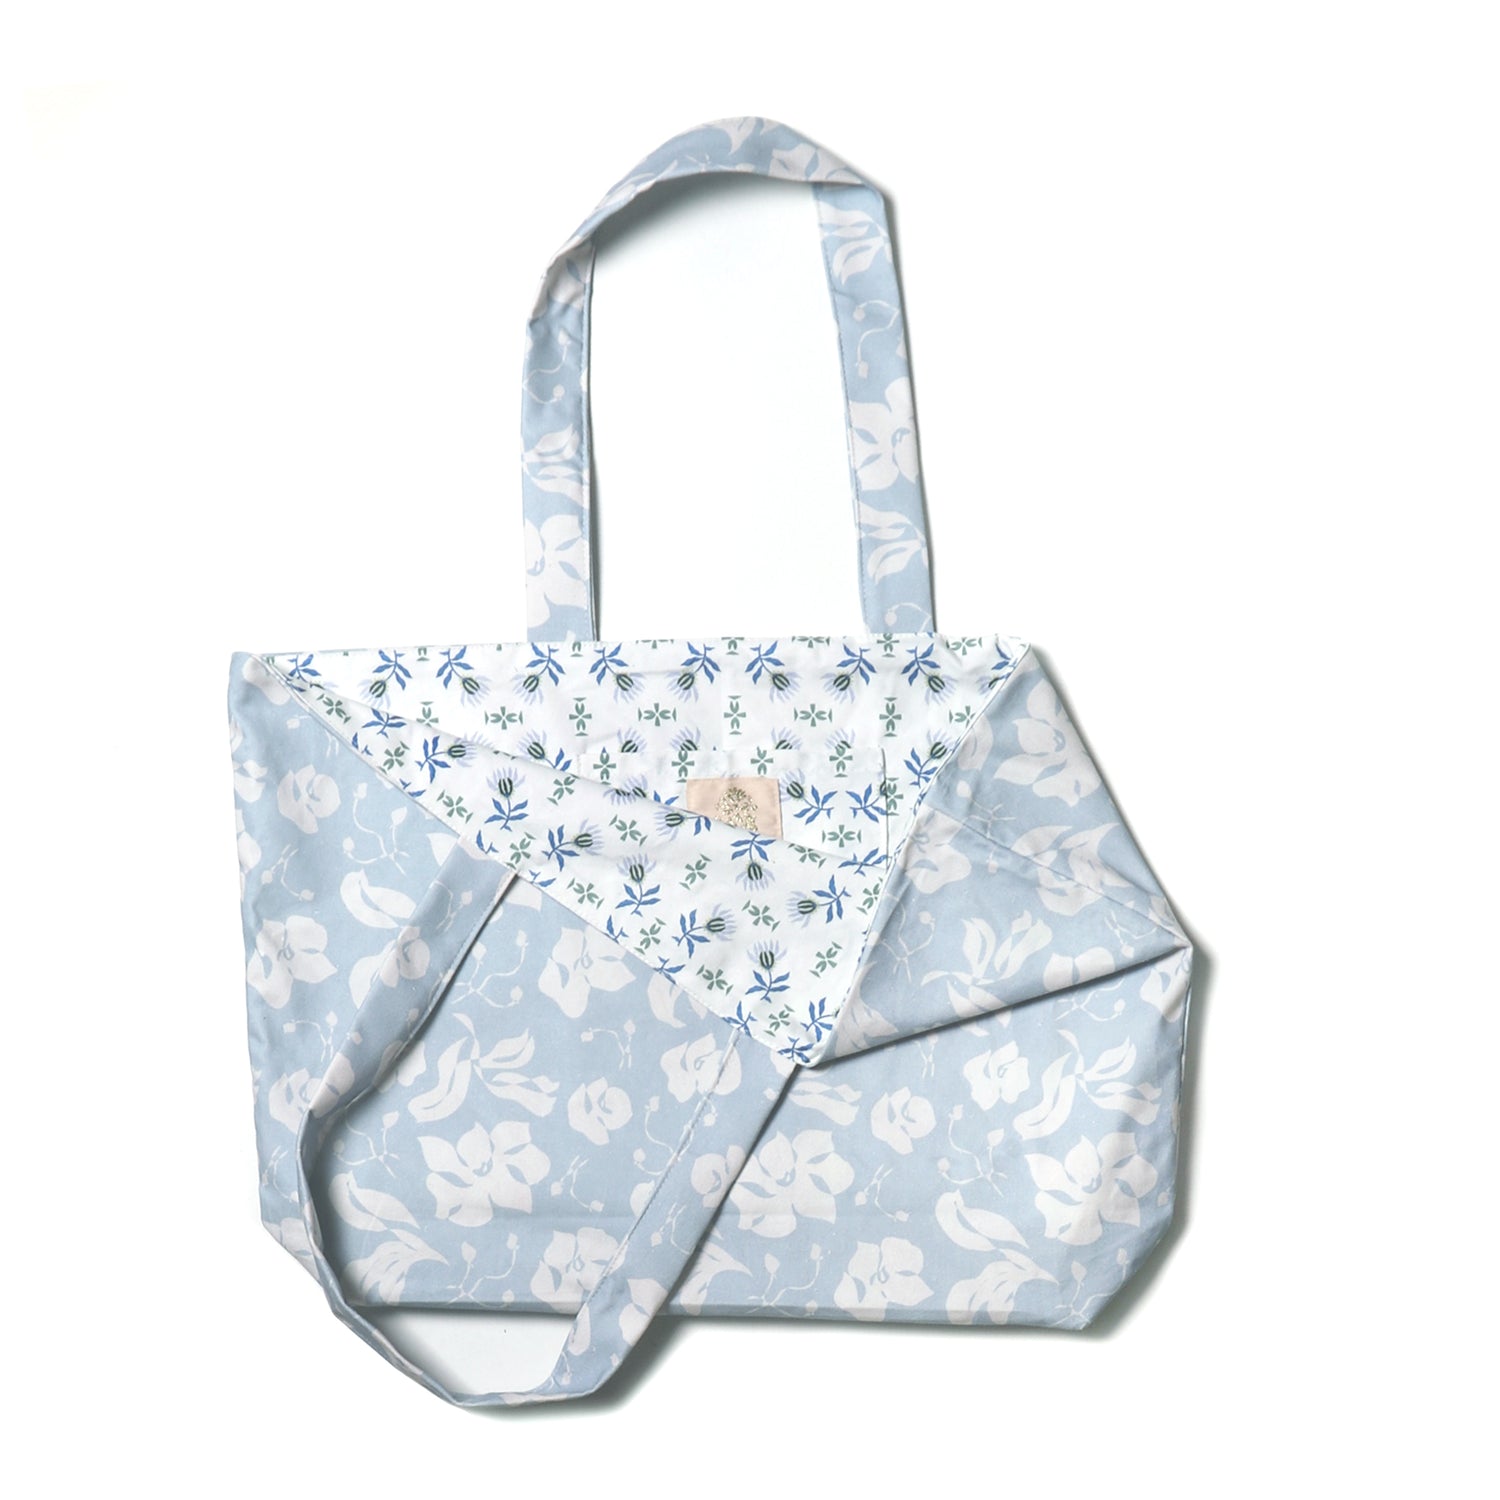 Opened Cornflower Blue Floral Printed Bag with Blue & Green Floral Printed Inside